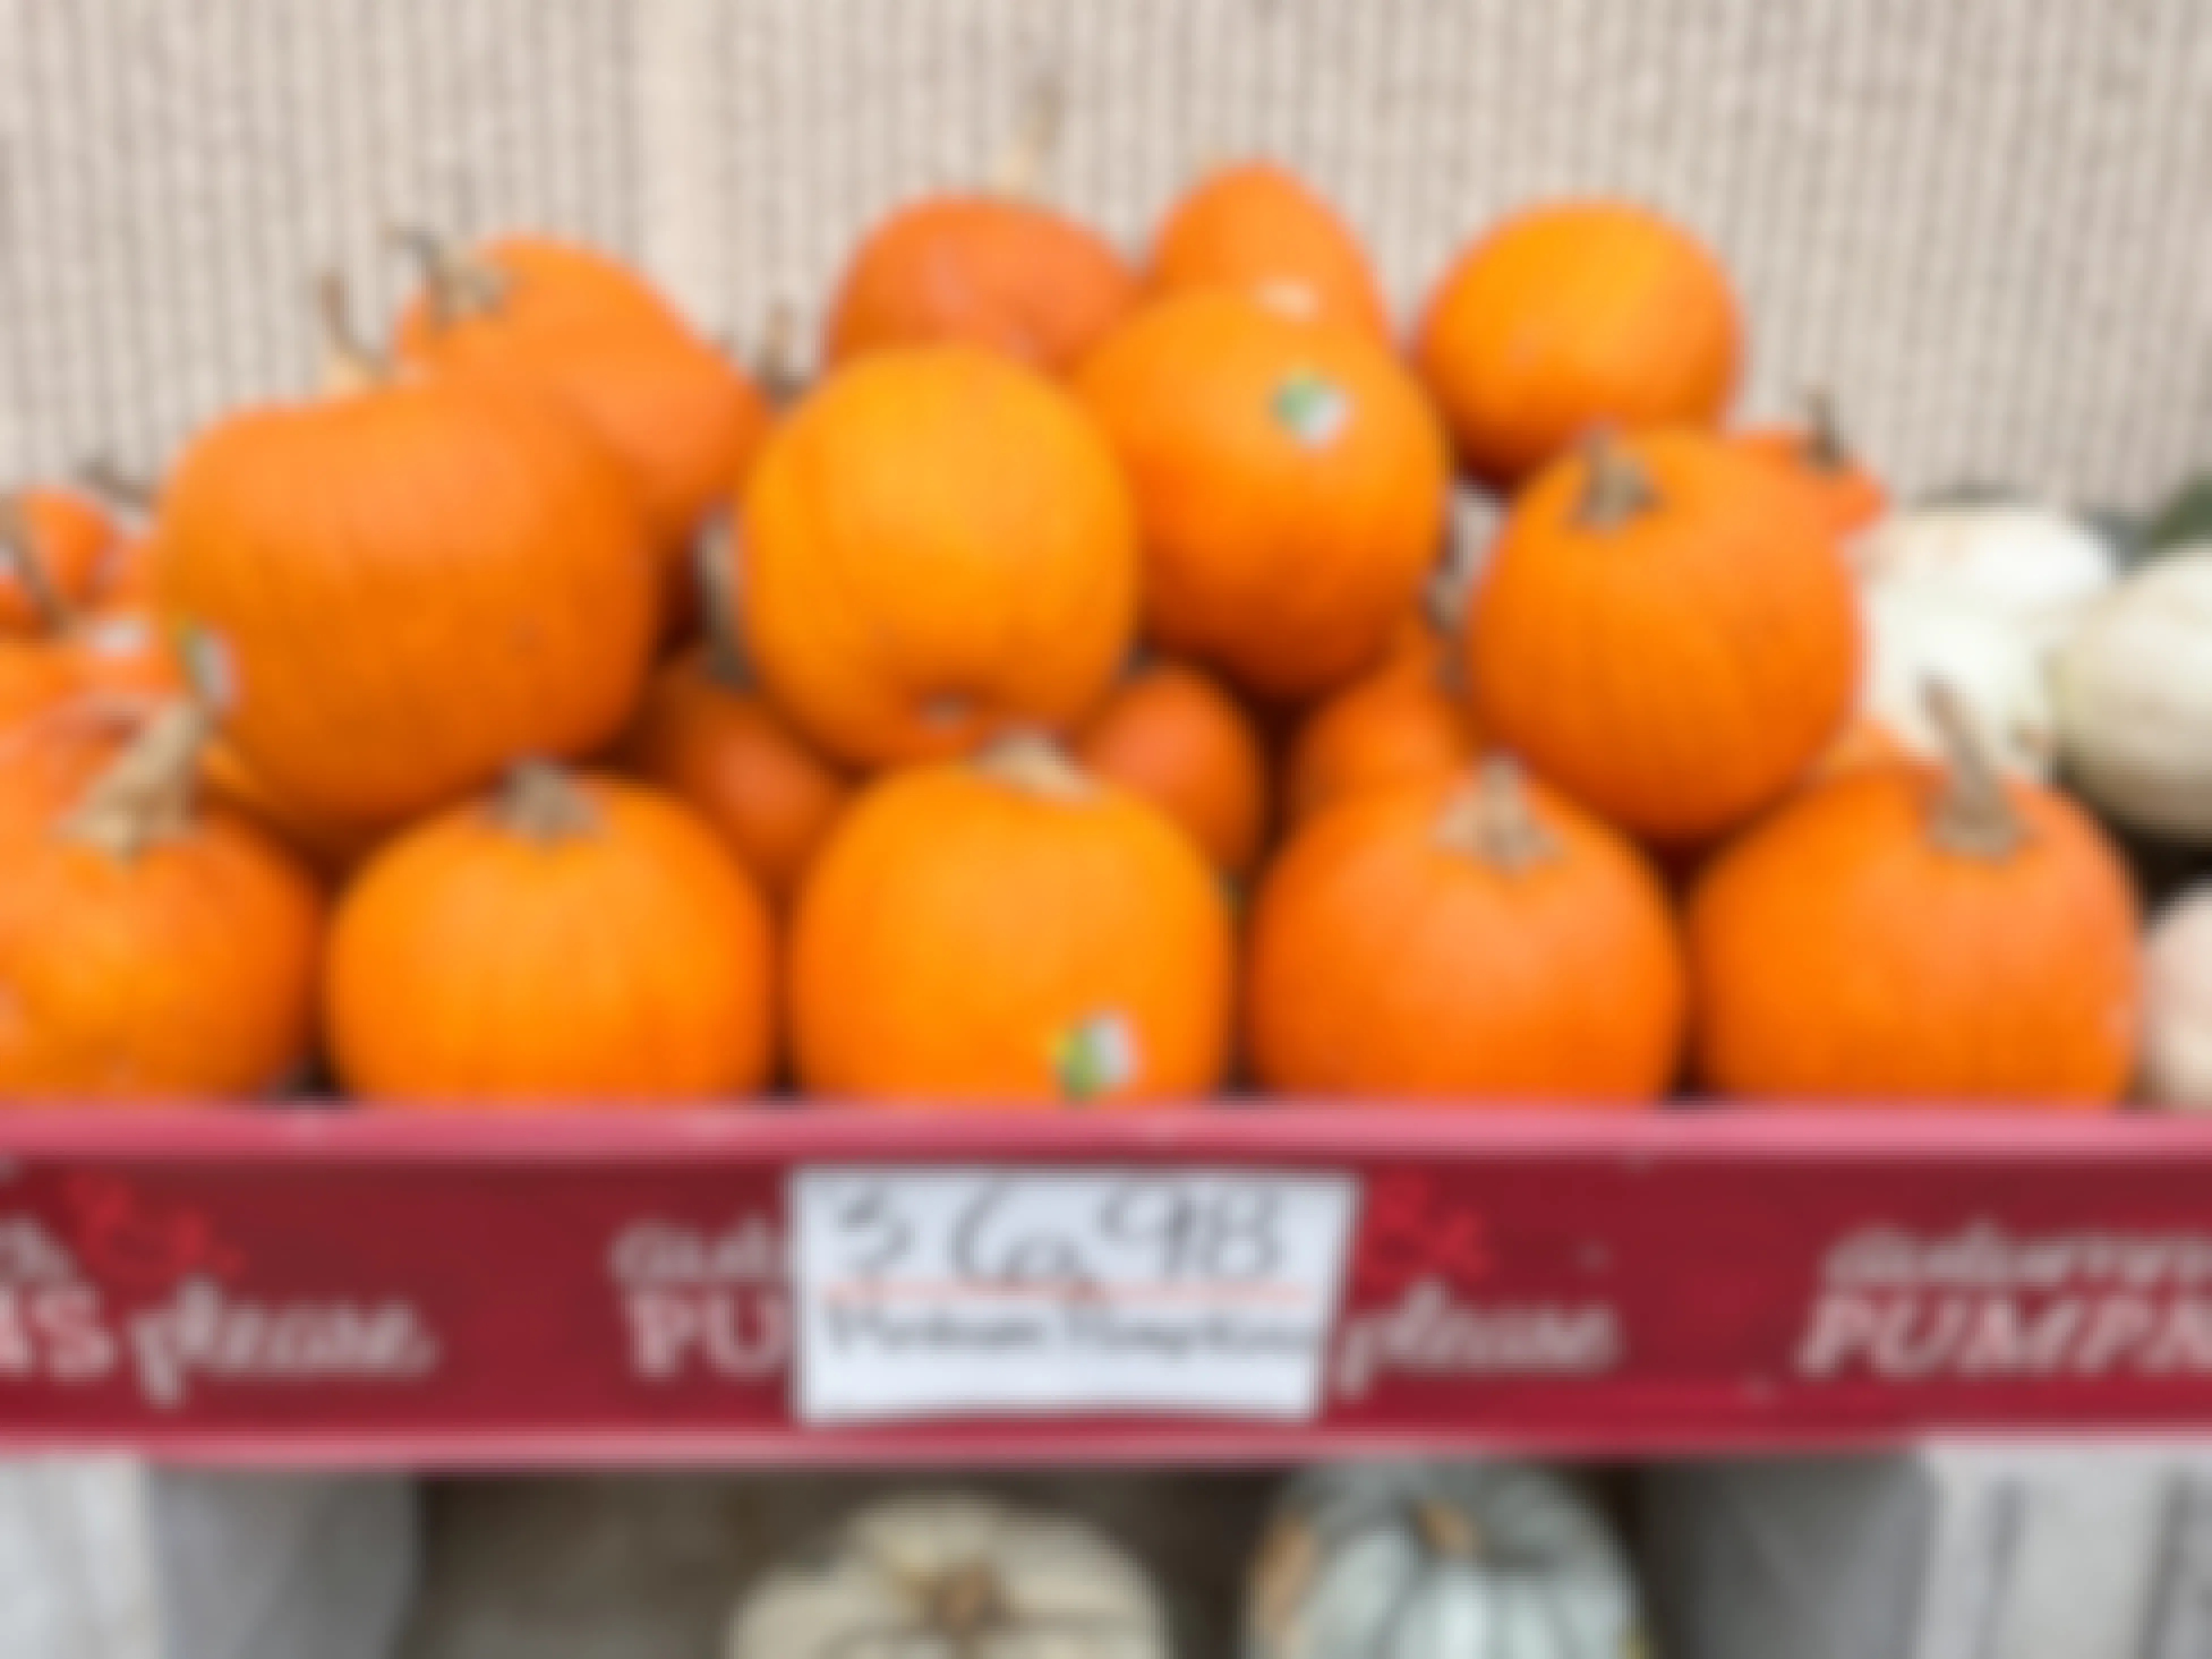 A large display of pumpkins outside of a Home Depot with a price sign of $6.98